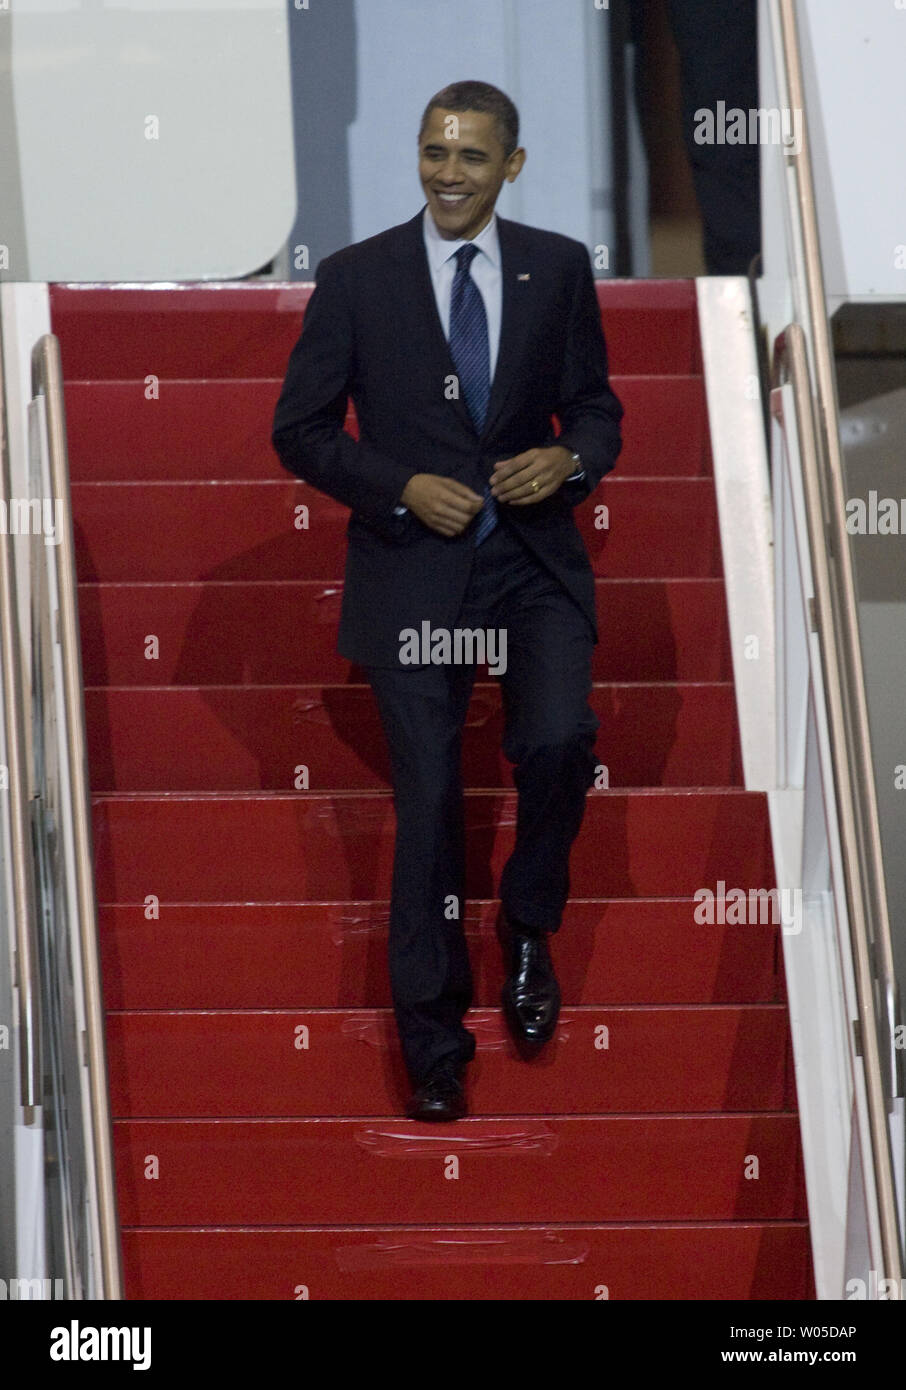 President Barack Obama walks down the stairs of a Boeing 787 Dreamliner to meet with Boeing employees and speak about his blueprint for an economy built to last, based on American domestic manufacturing and promoting American exports,  at the aerospace giant's assembly facility in Everett, Washington on February 17, 2012. Later Obama will be attending two fund raising events for his re-election campaign.   UPI/Jim Bryant Stock Photo